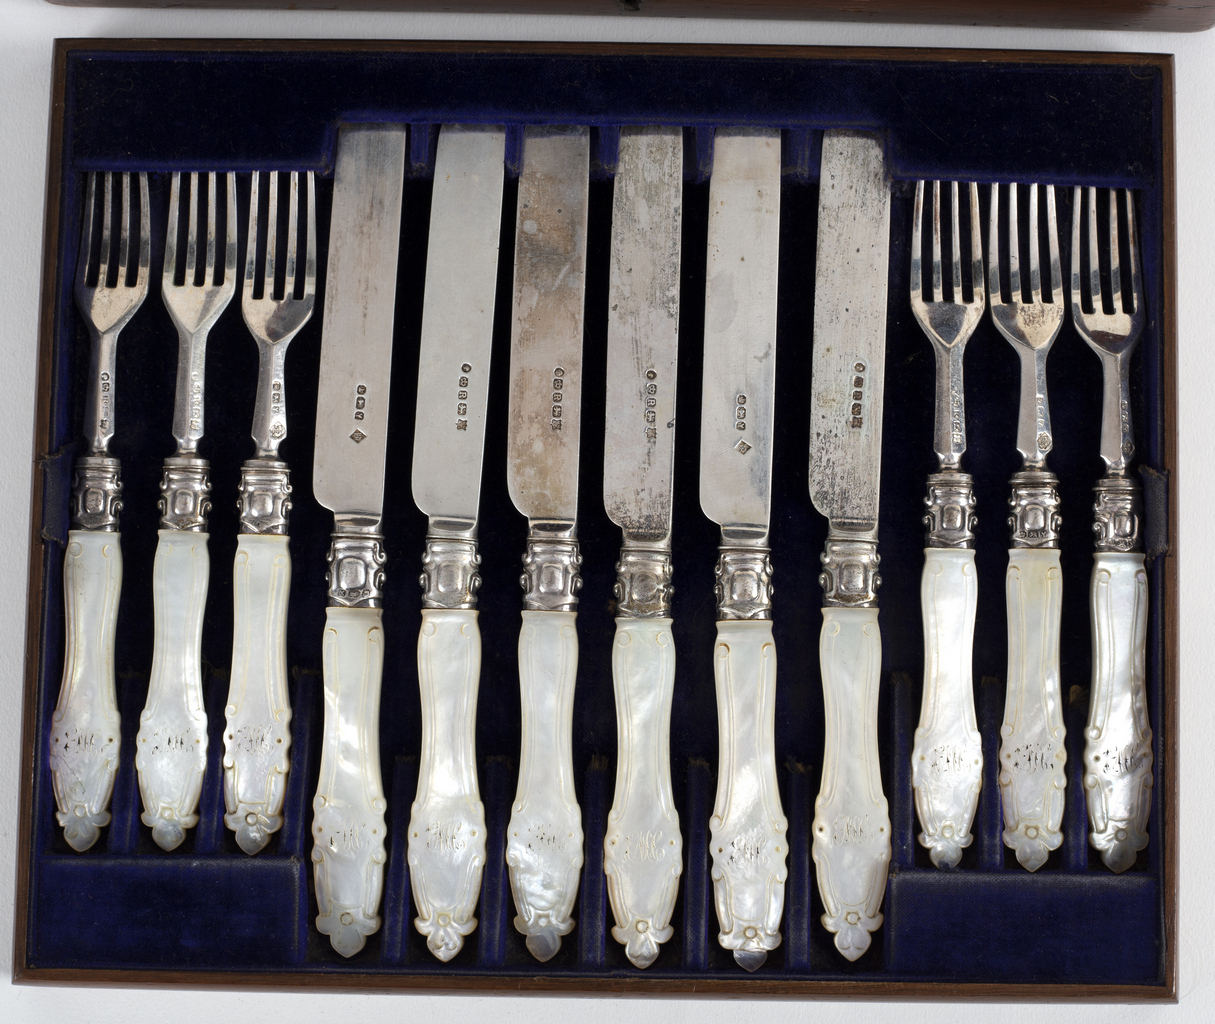 Twelve pairs of silver dessert knives and forks, Richard Martin and Ebenezer Hall, Sheffield 1891, - Image 2 of 2